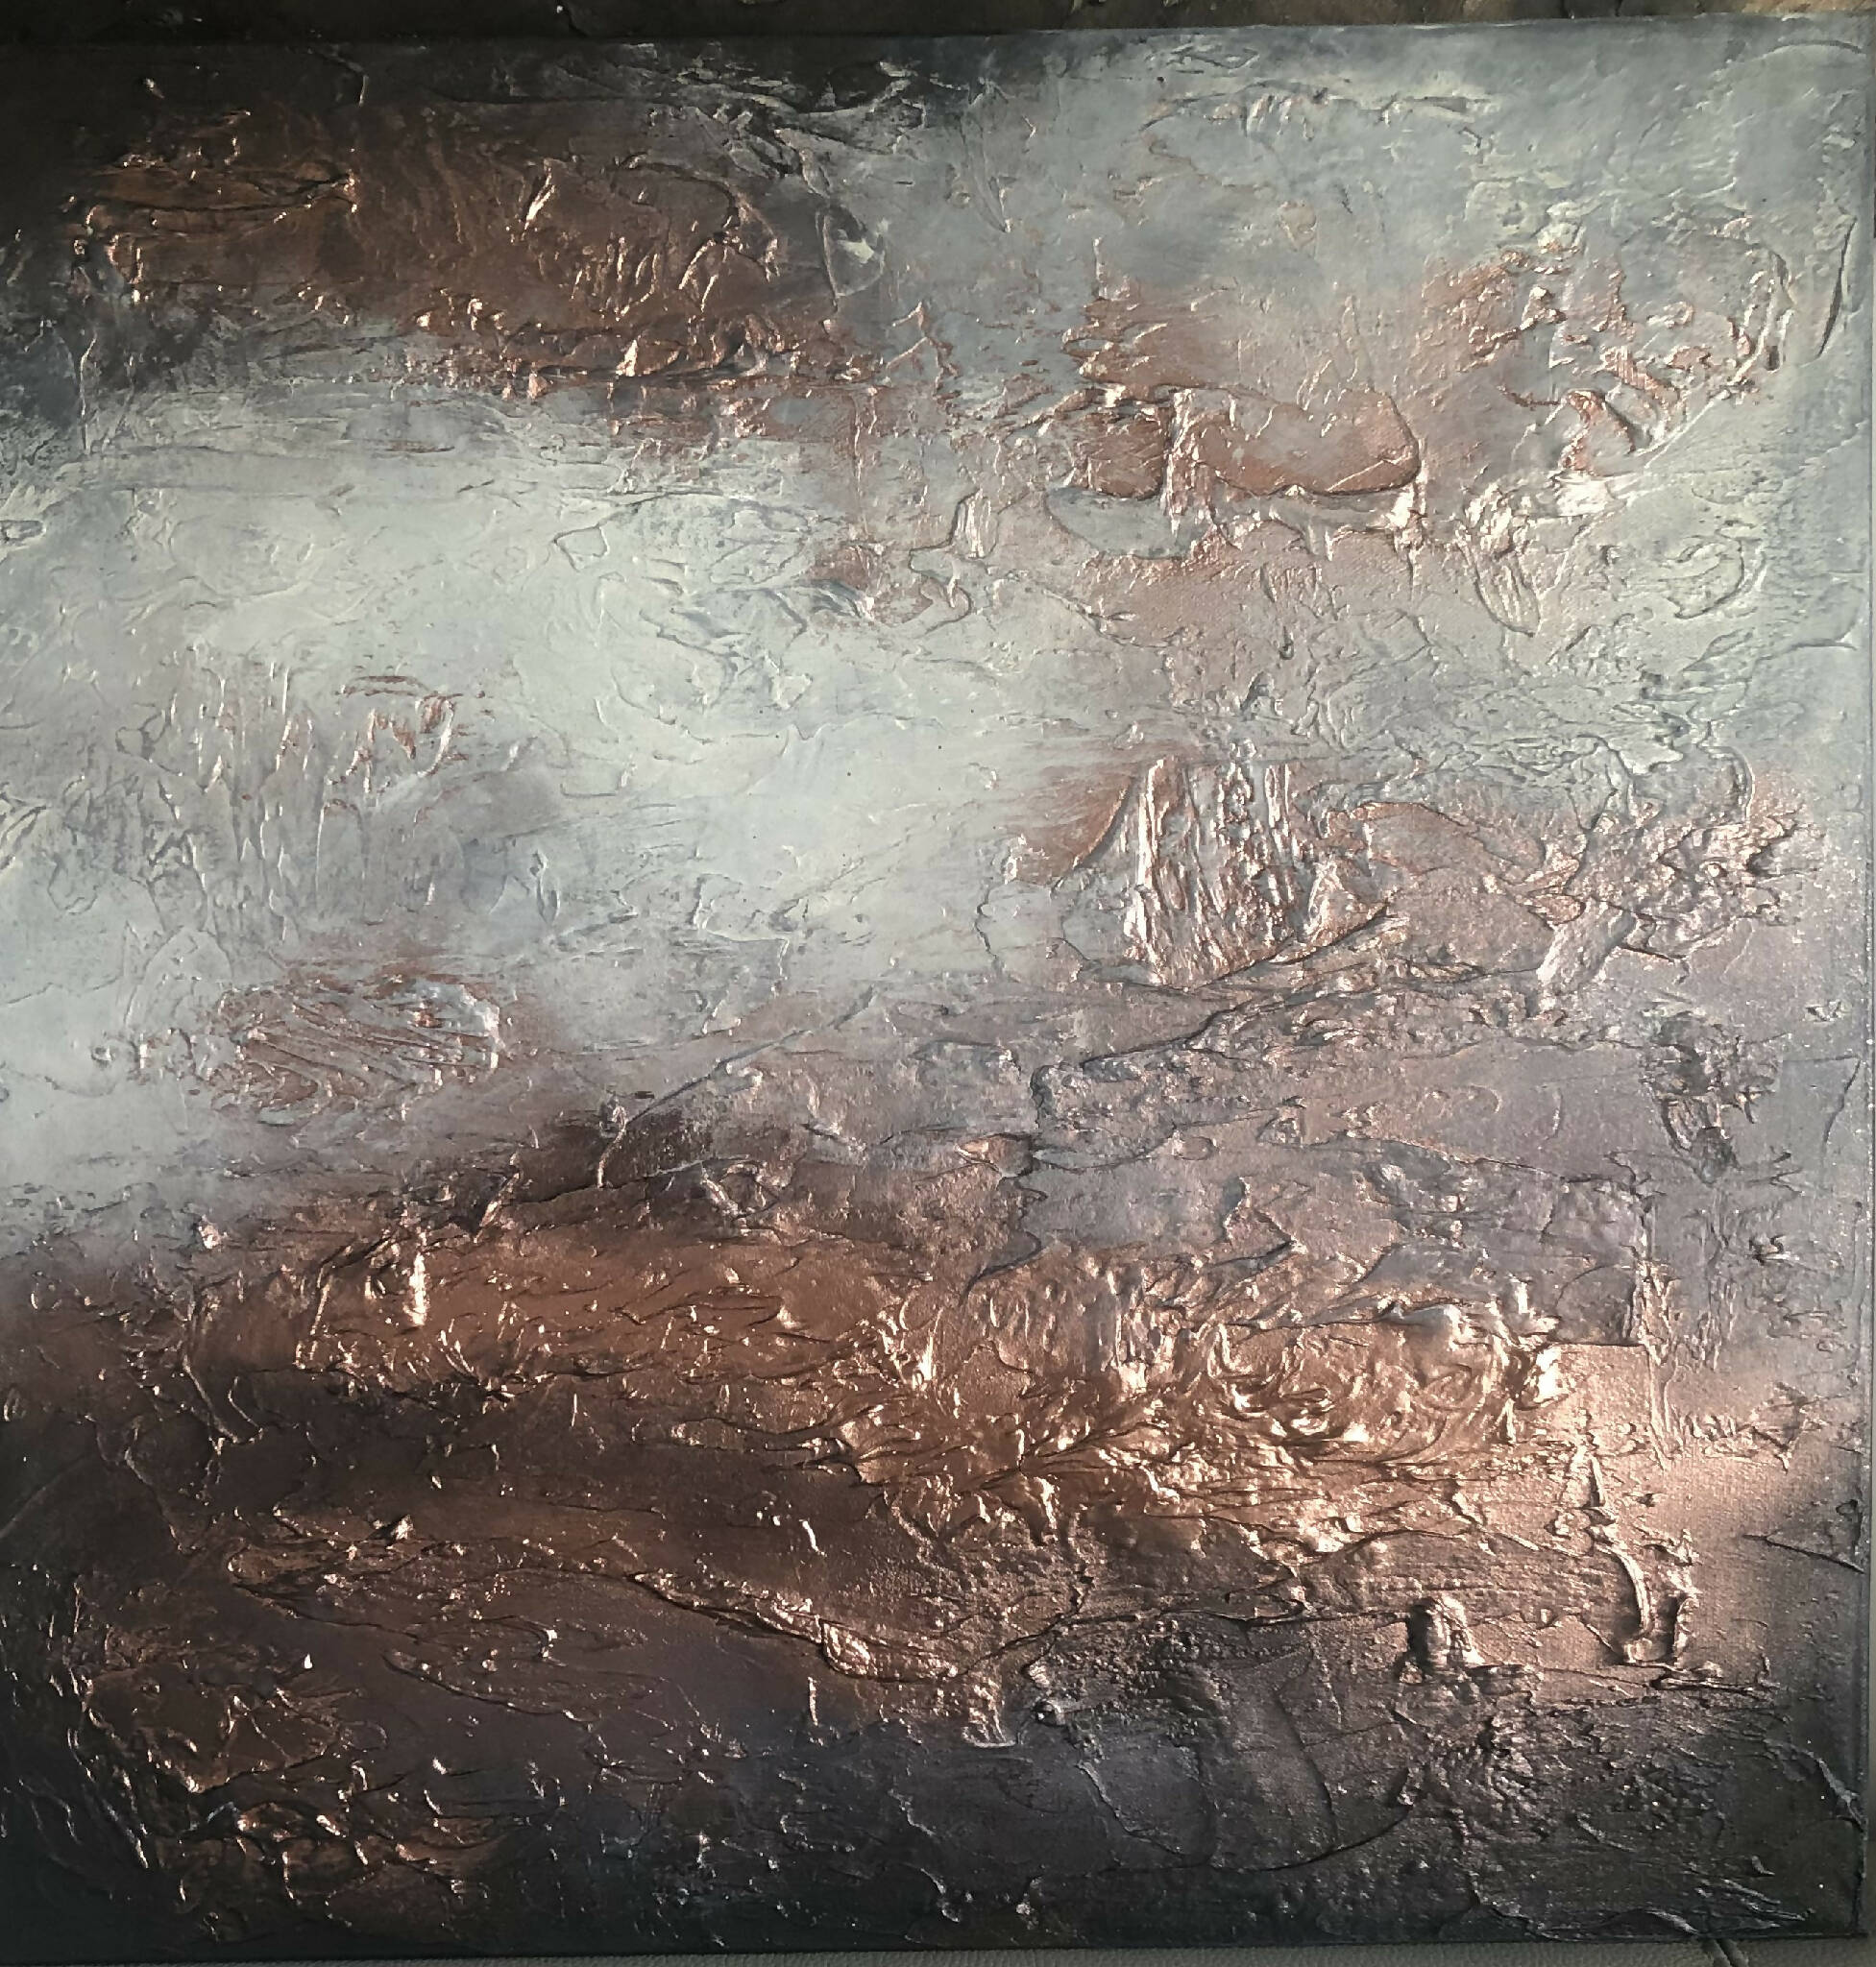 FORGE - Original textured canvas in shades of grey, cream and metallic copper